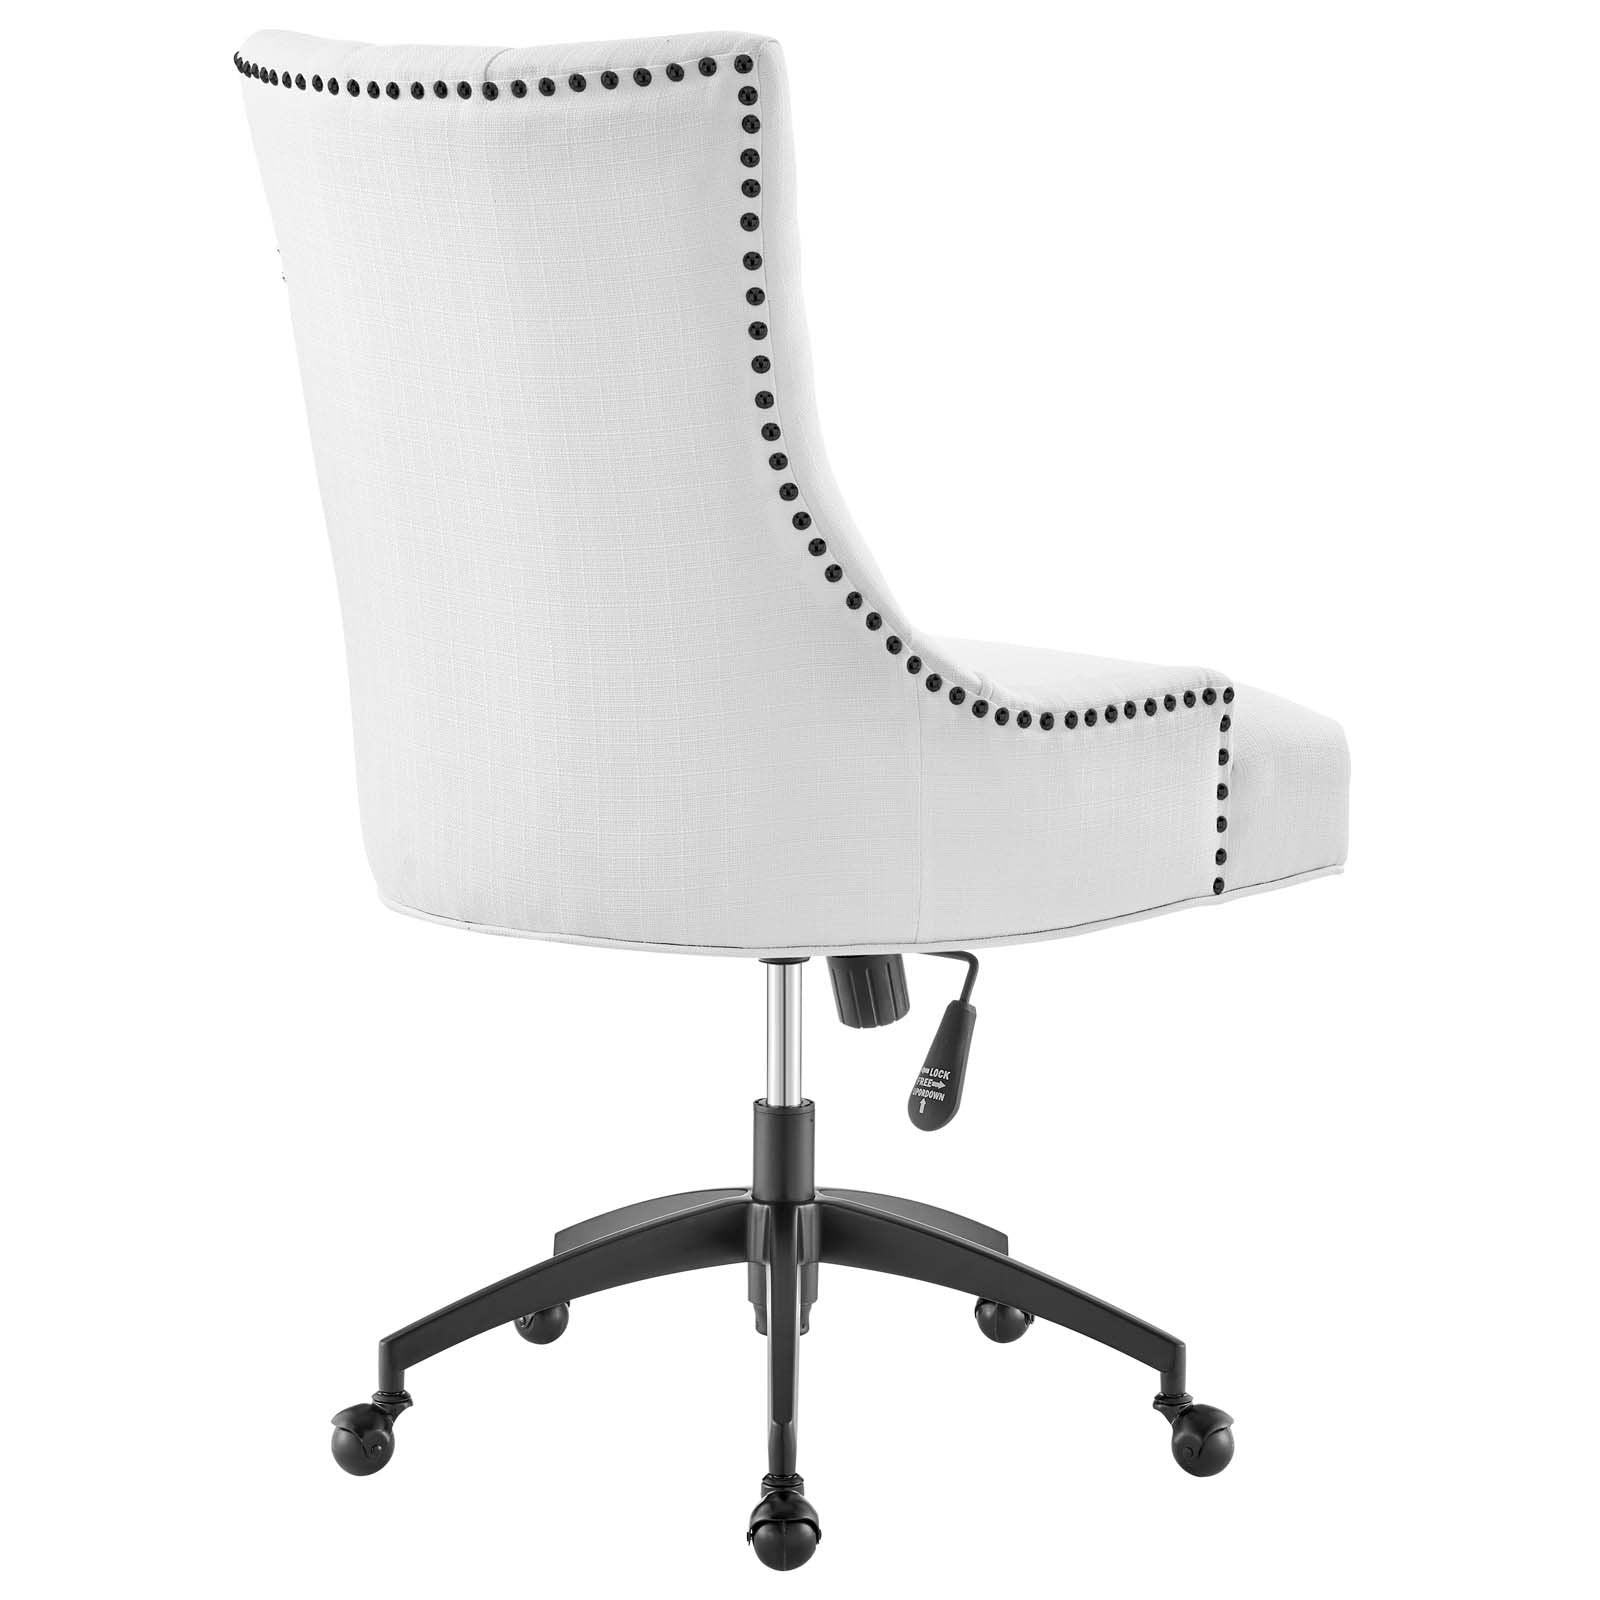 Regent Tufted Fabric Office Chair - East Shore Modern Home Furnishings